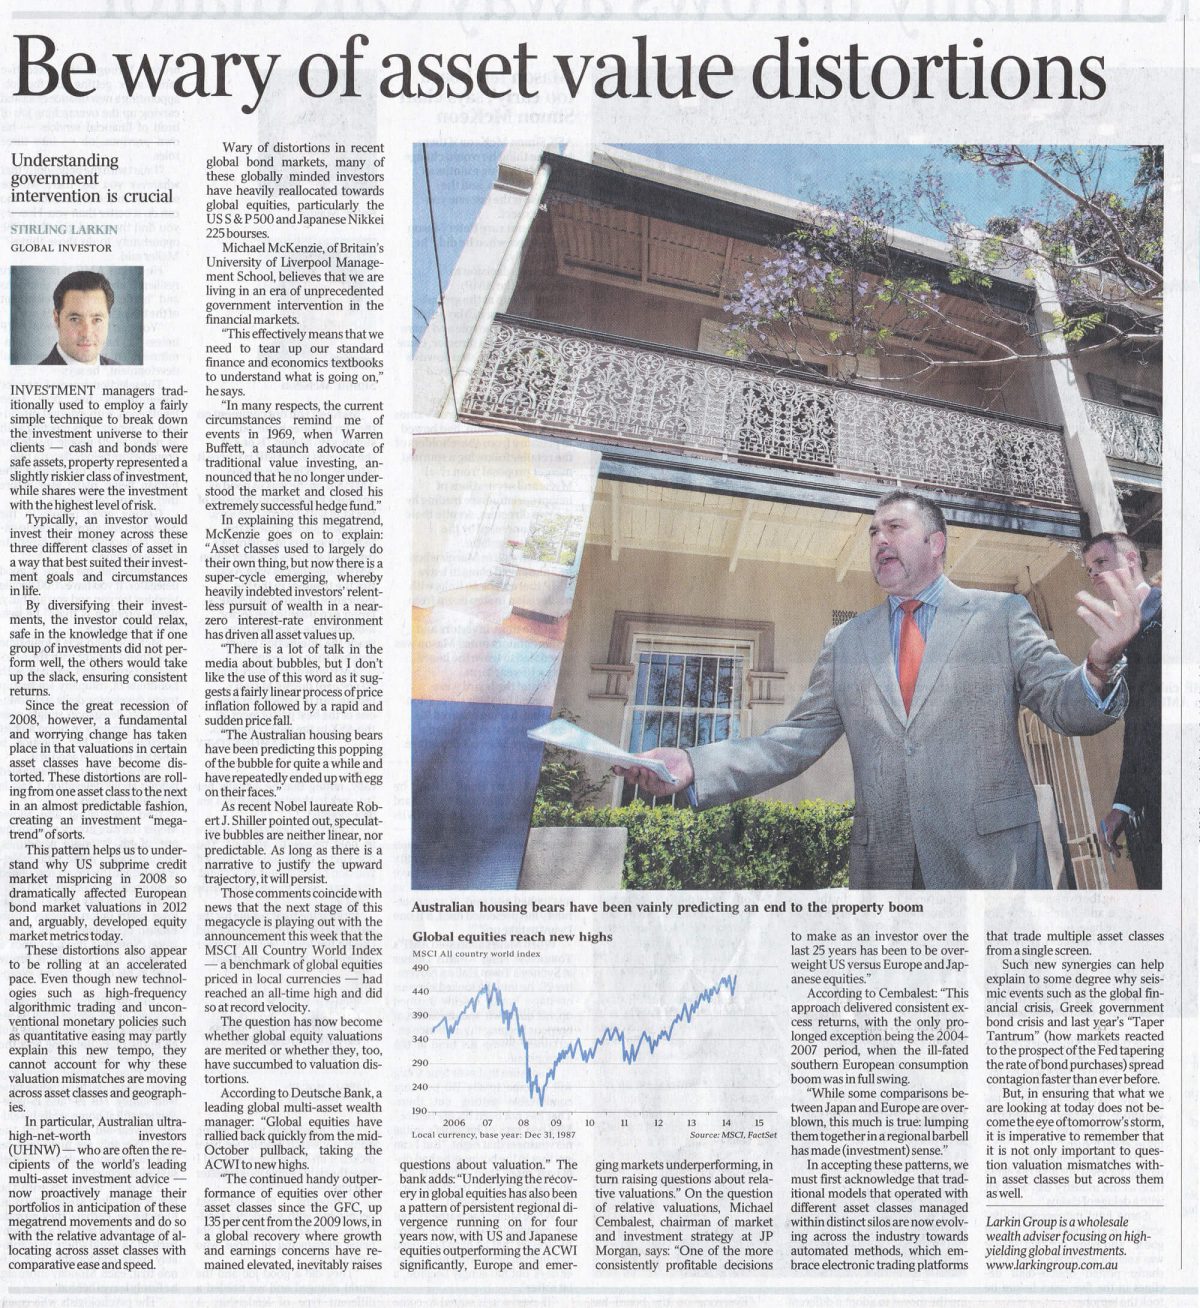 australian standfirst discusses real estate in 2014 in the australian newspaper